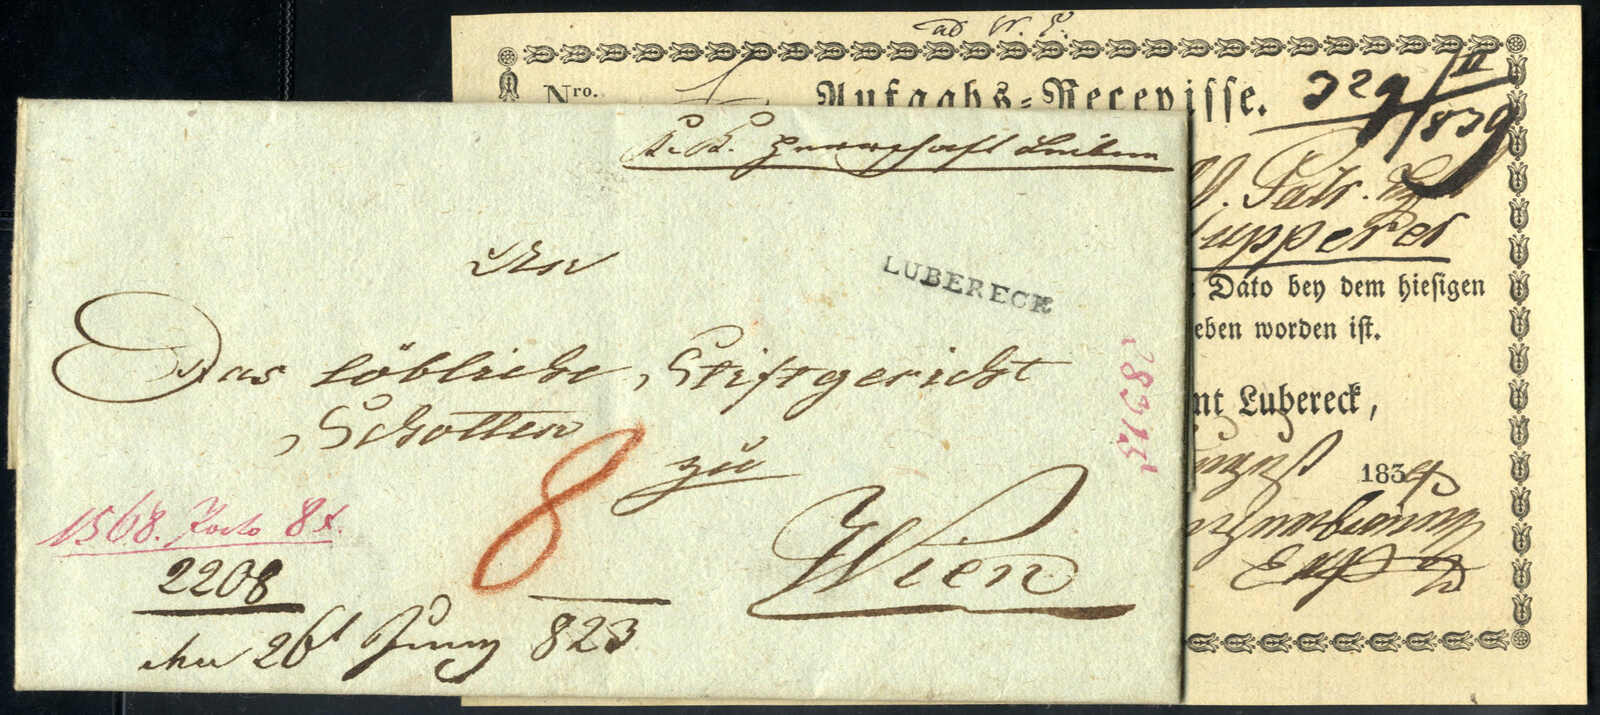 Lot 1623 - europe Austria Cancellations Lower Austria -  Viennafil Auktionen Auction #69 Worldwide Mail Auction: Italy, Austria, Germany, Europe and Overseas